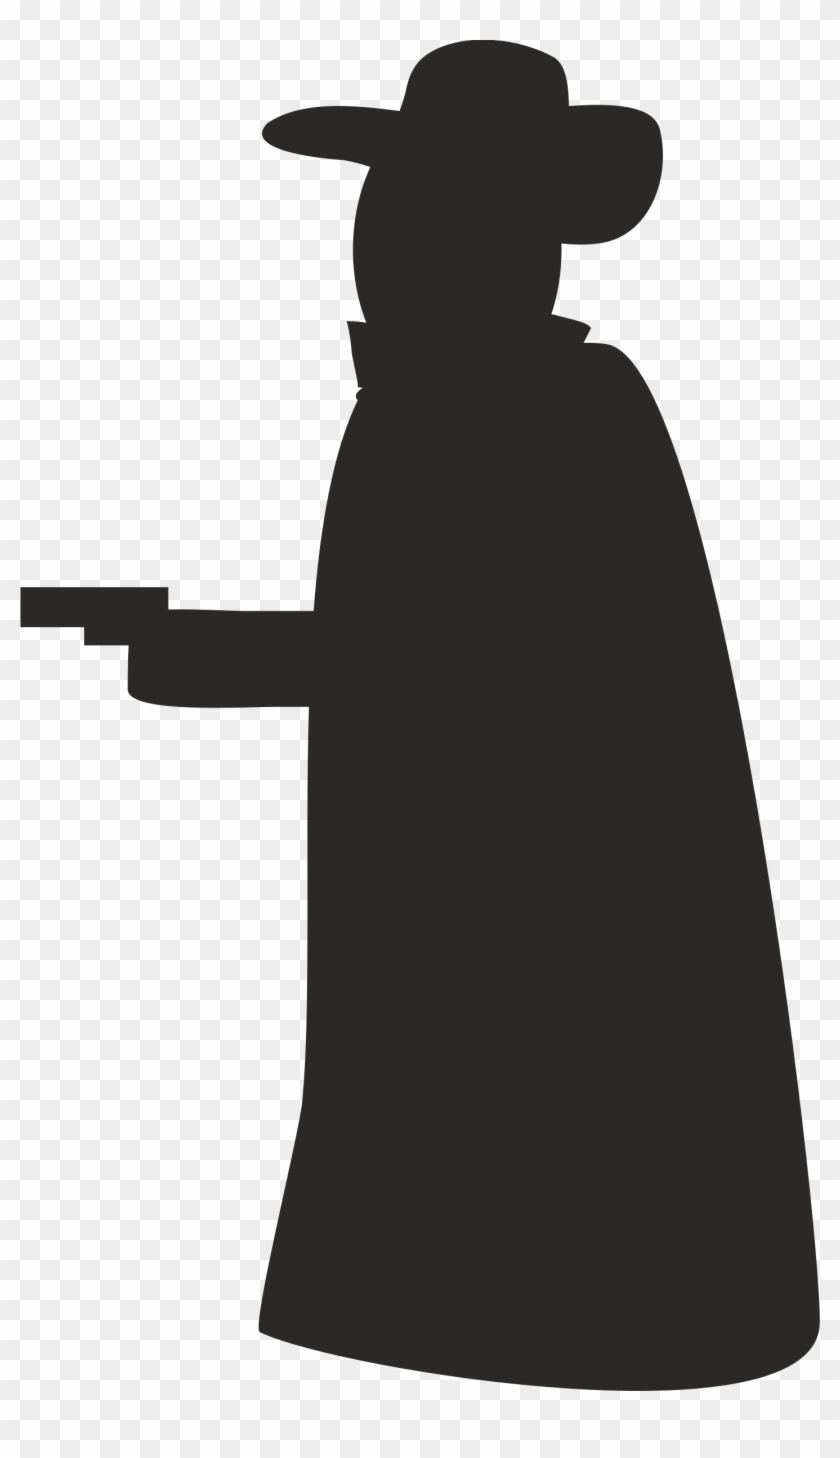 Big Image - Robber Silhouette Png #53534